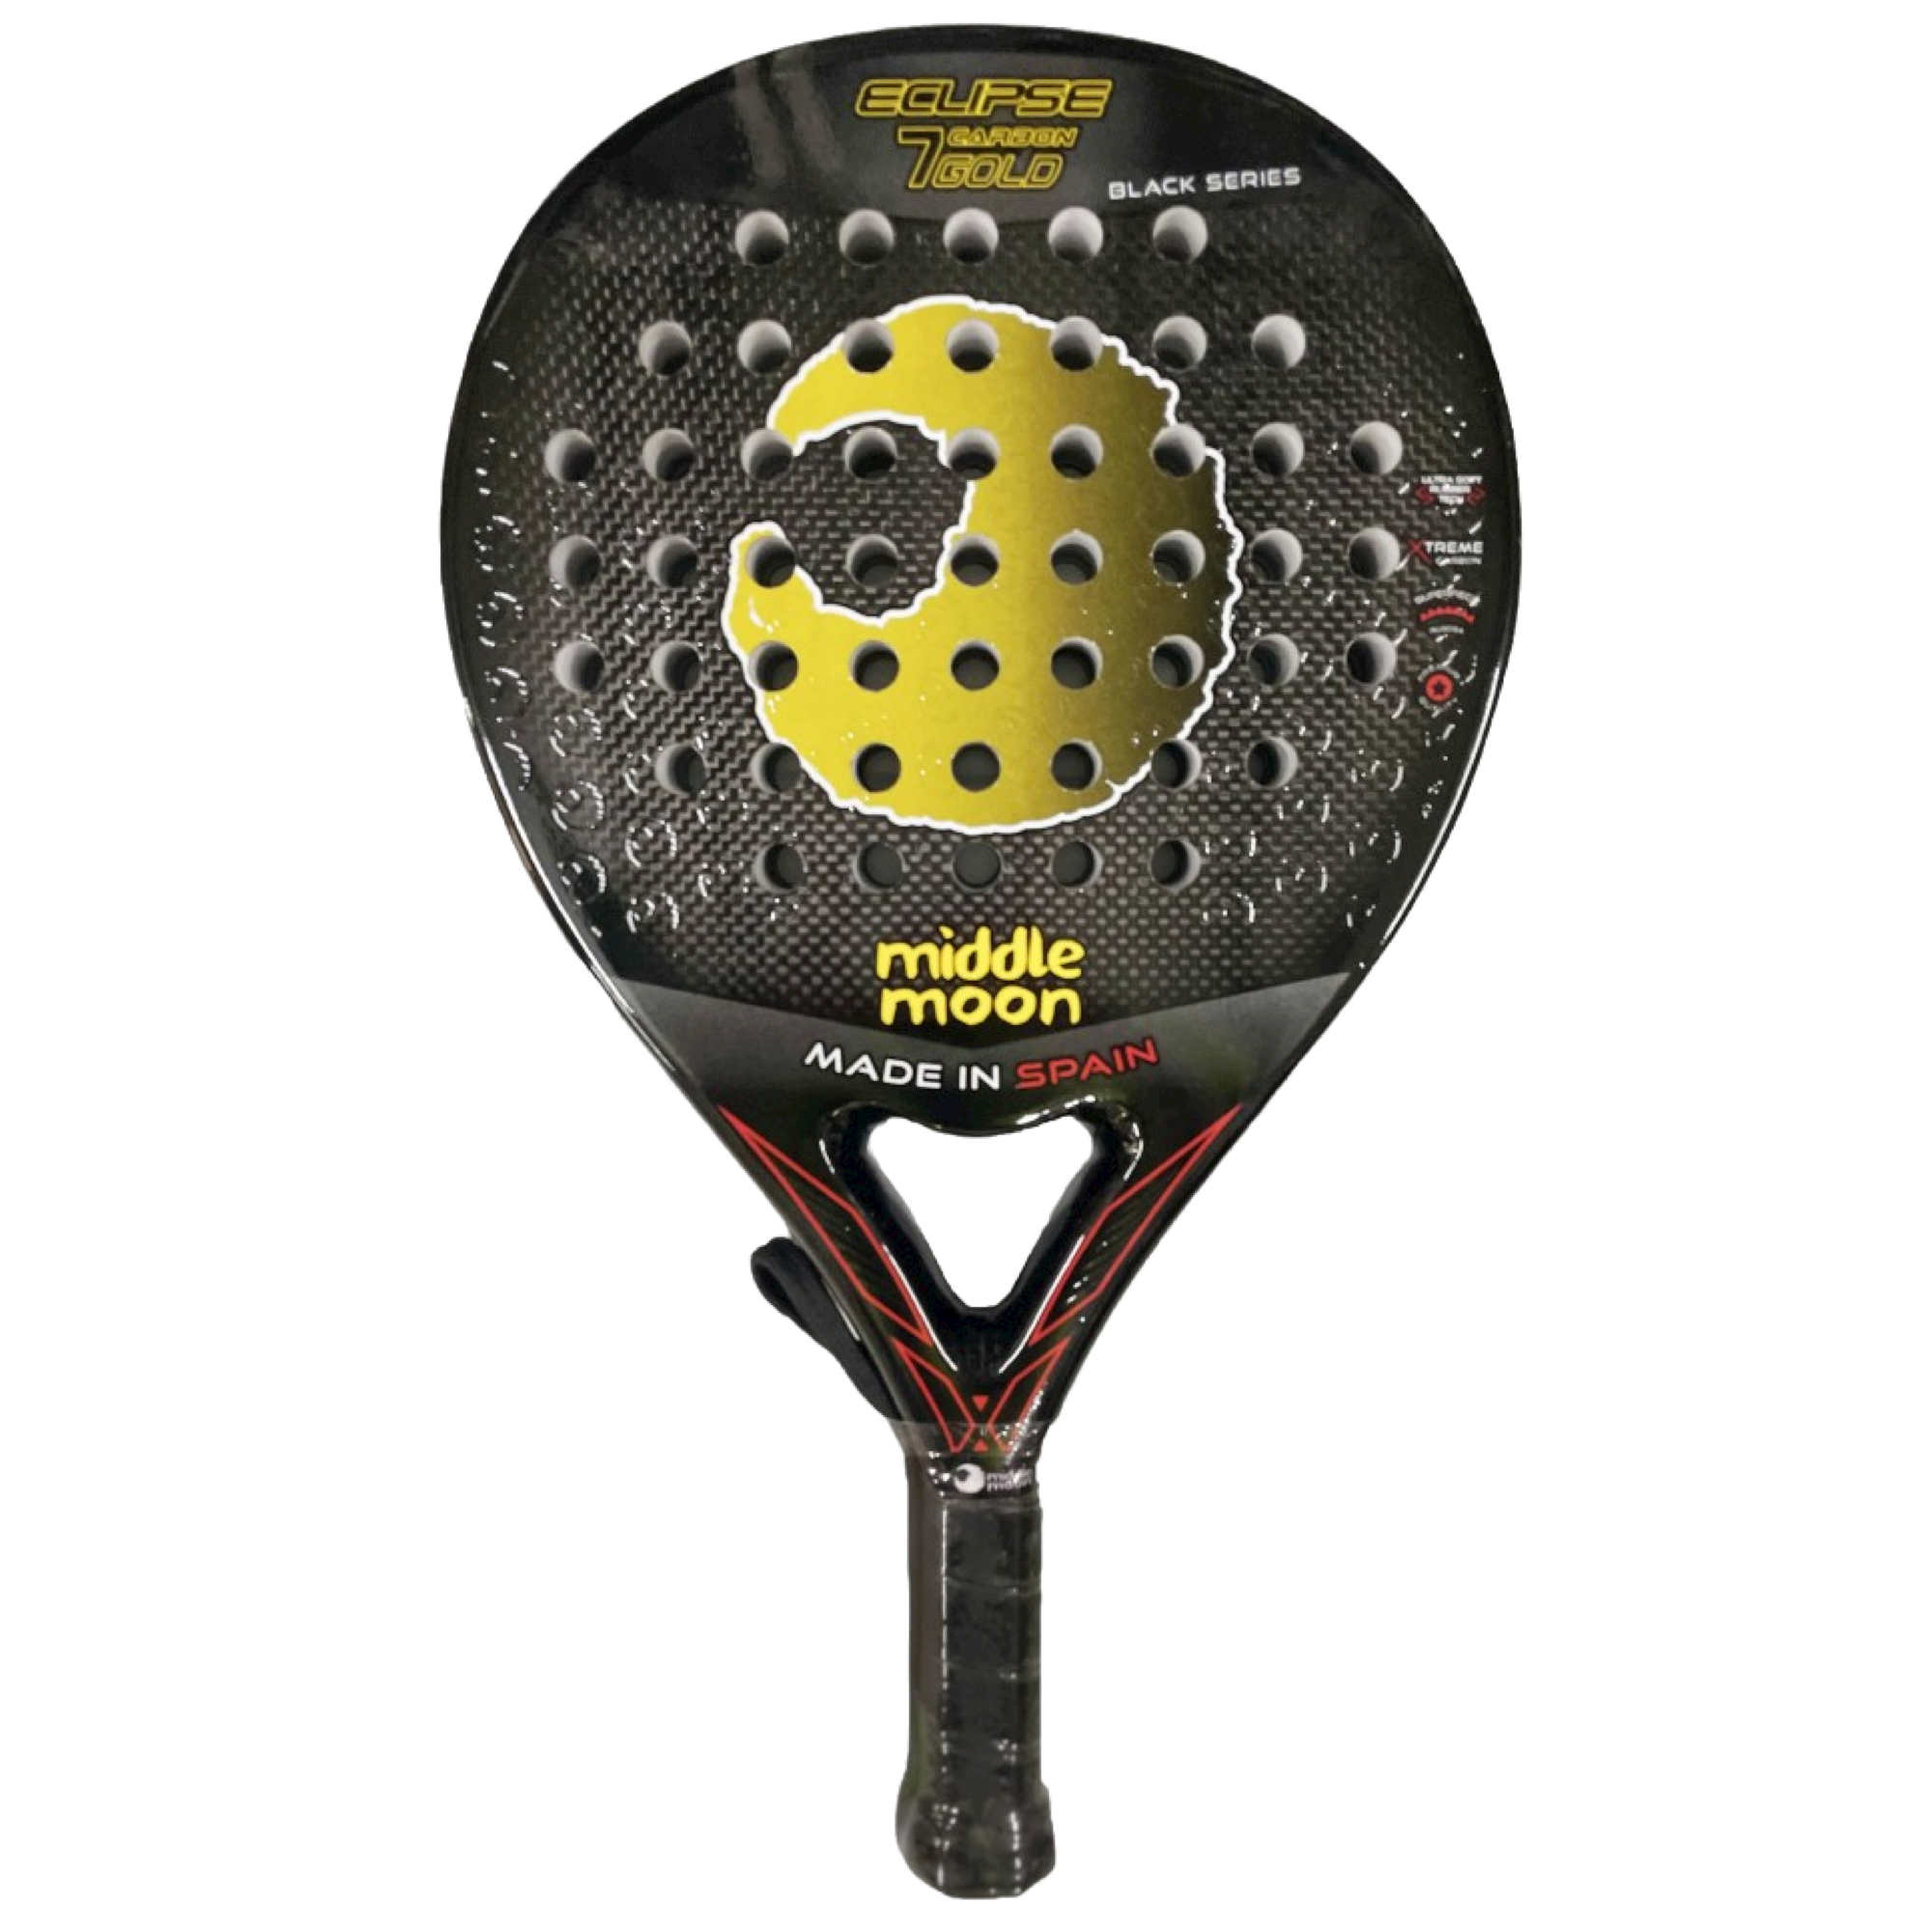 MIDDLE MOON ECLIPSE 7 CARBON GOLD BLACK SERIES